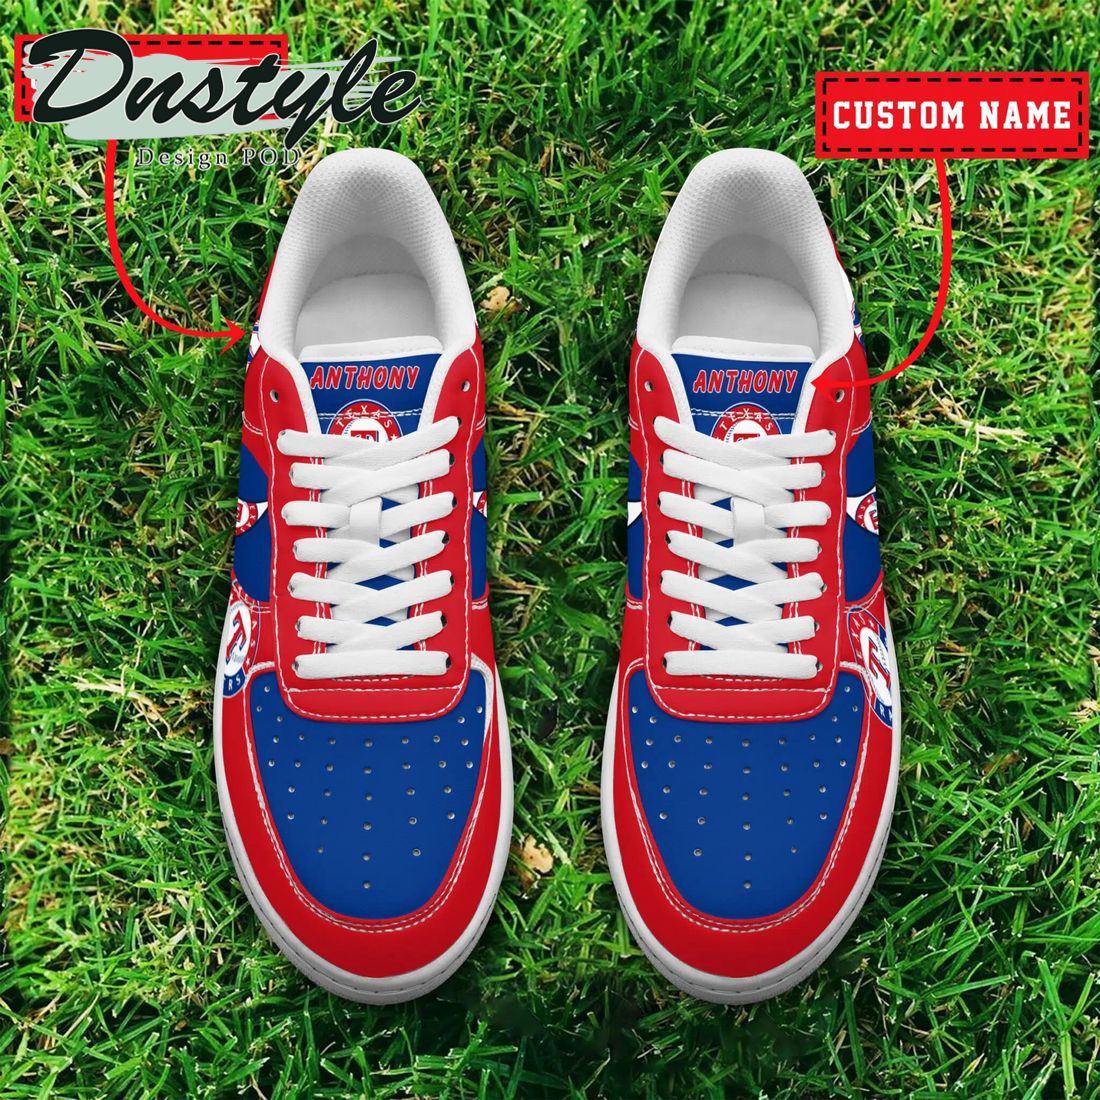 MLB Texas Rangers Personalized Name Number Nike Air Force 1 Sneakers